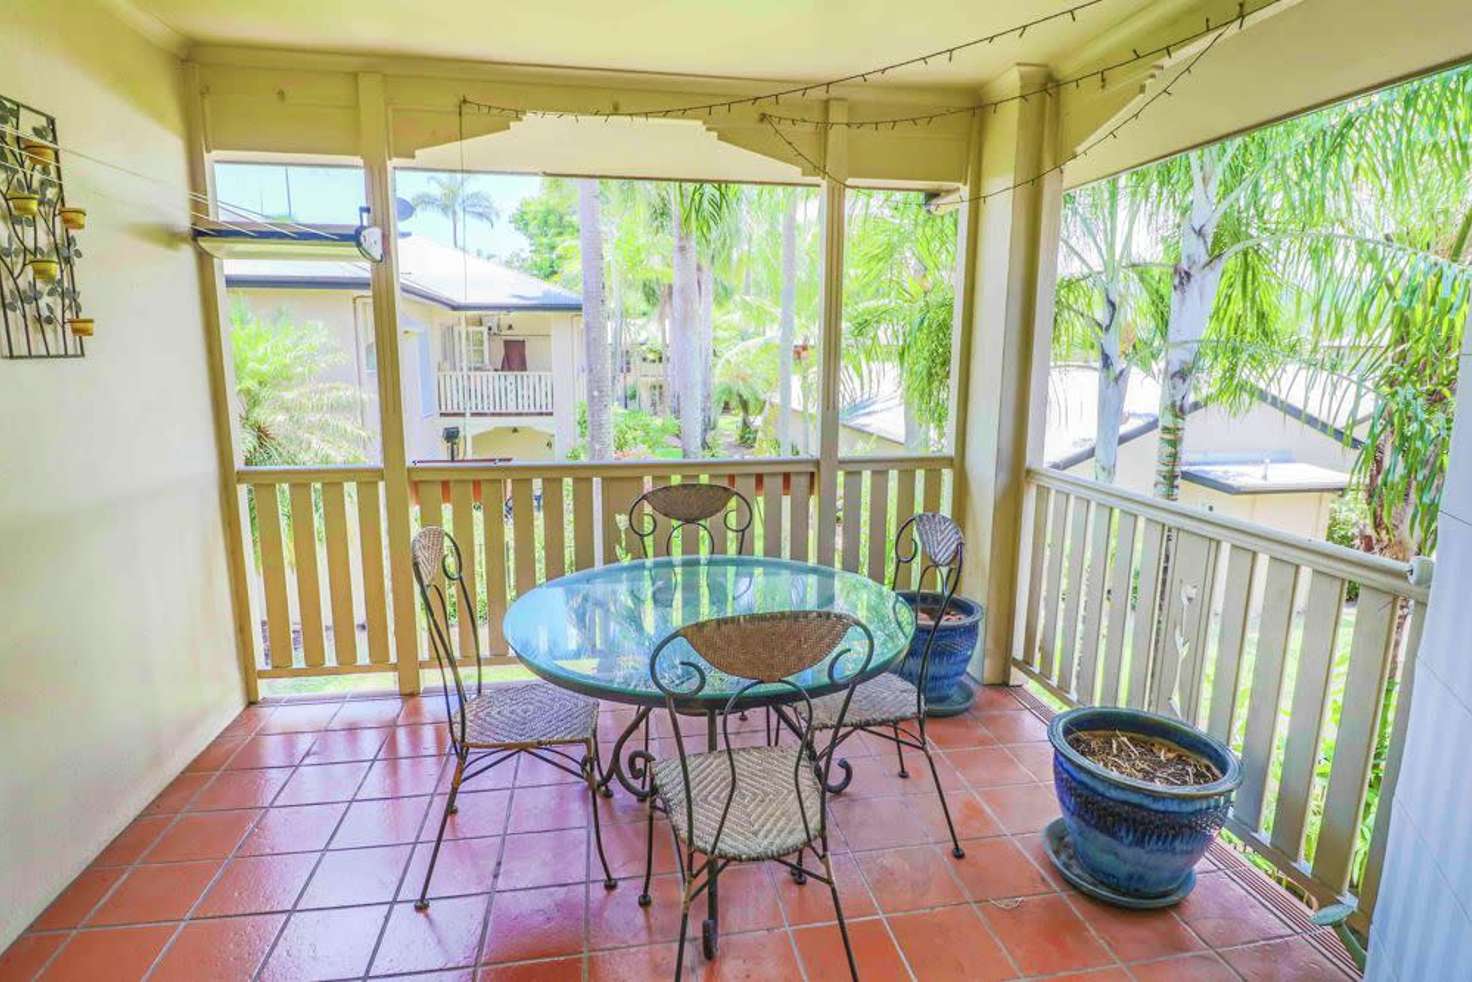 Main view of Homely unit listing, 25/176 Spence Street, Bungalow QLD 4870